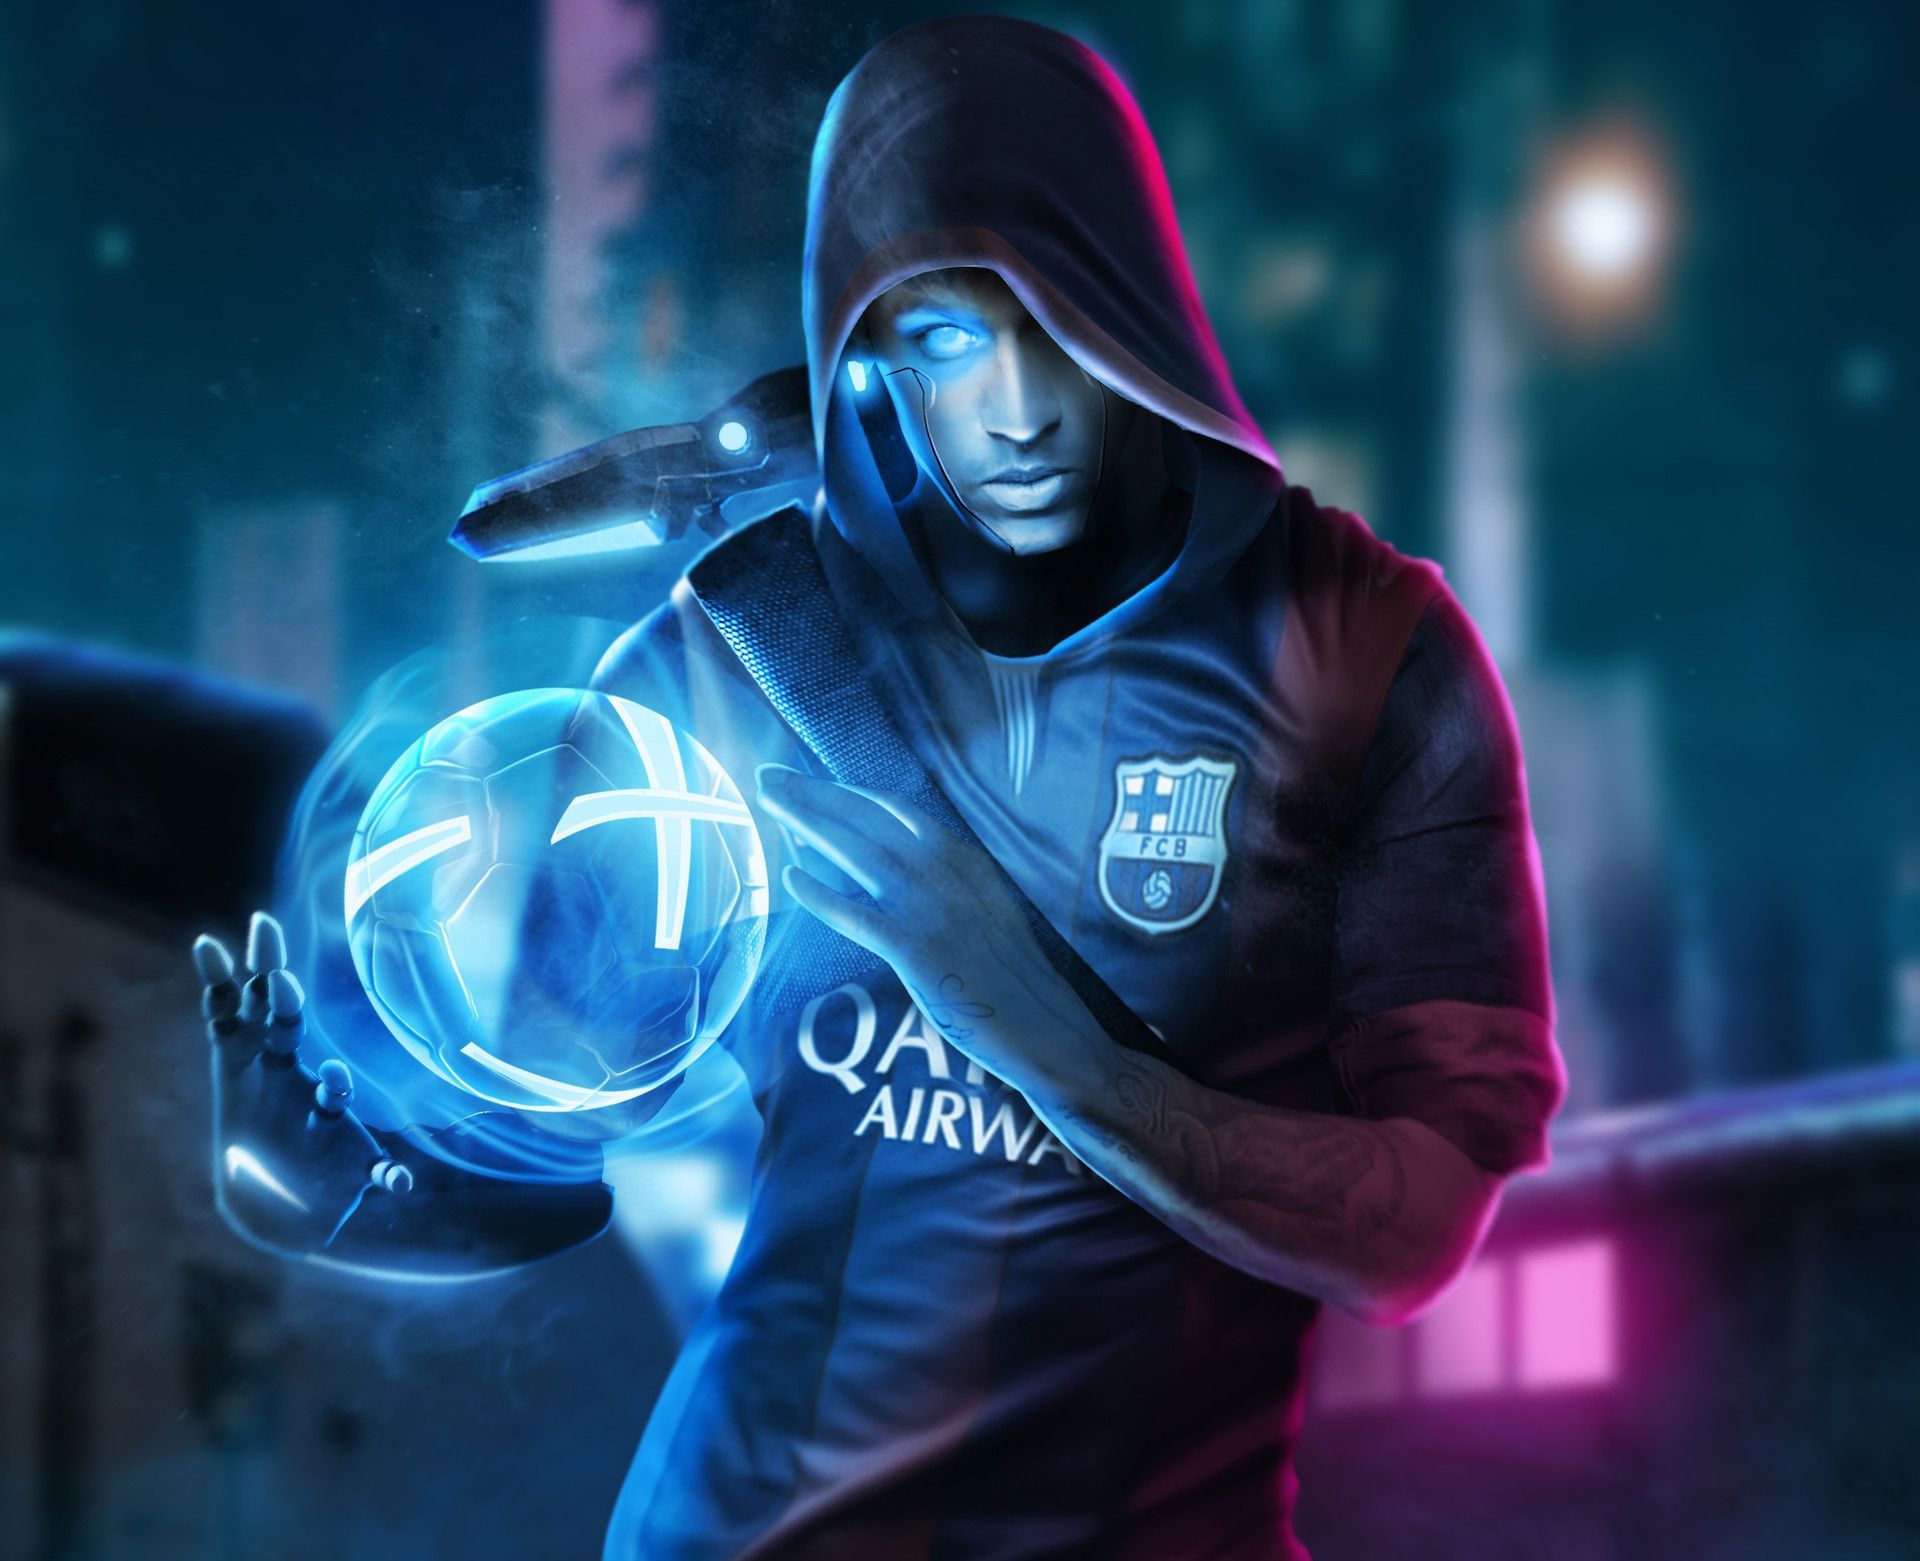 Football player in a blue hoodie holding a glowing ball - Neymar